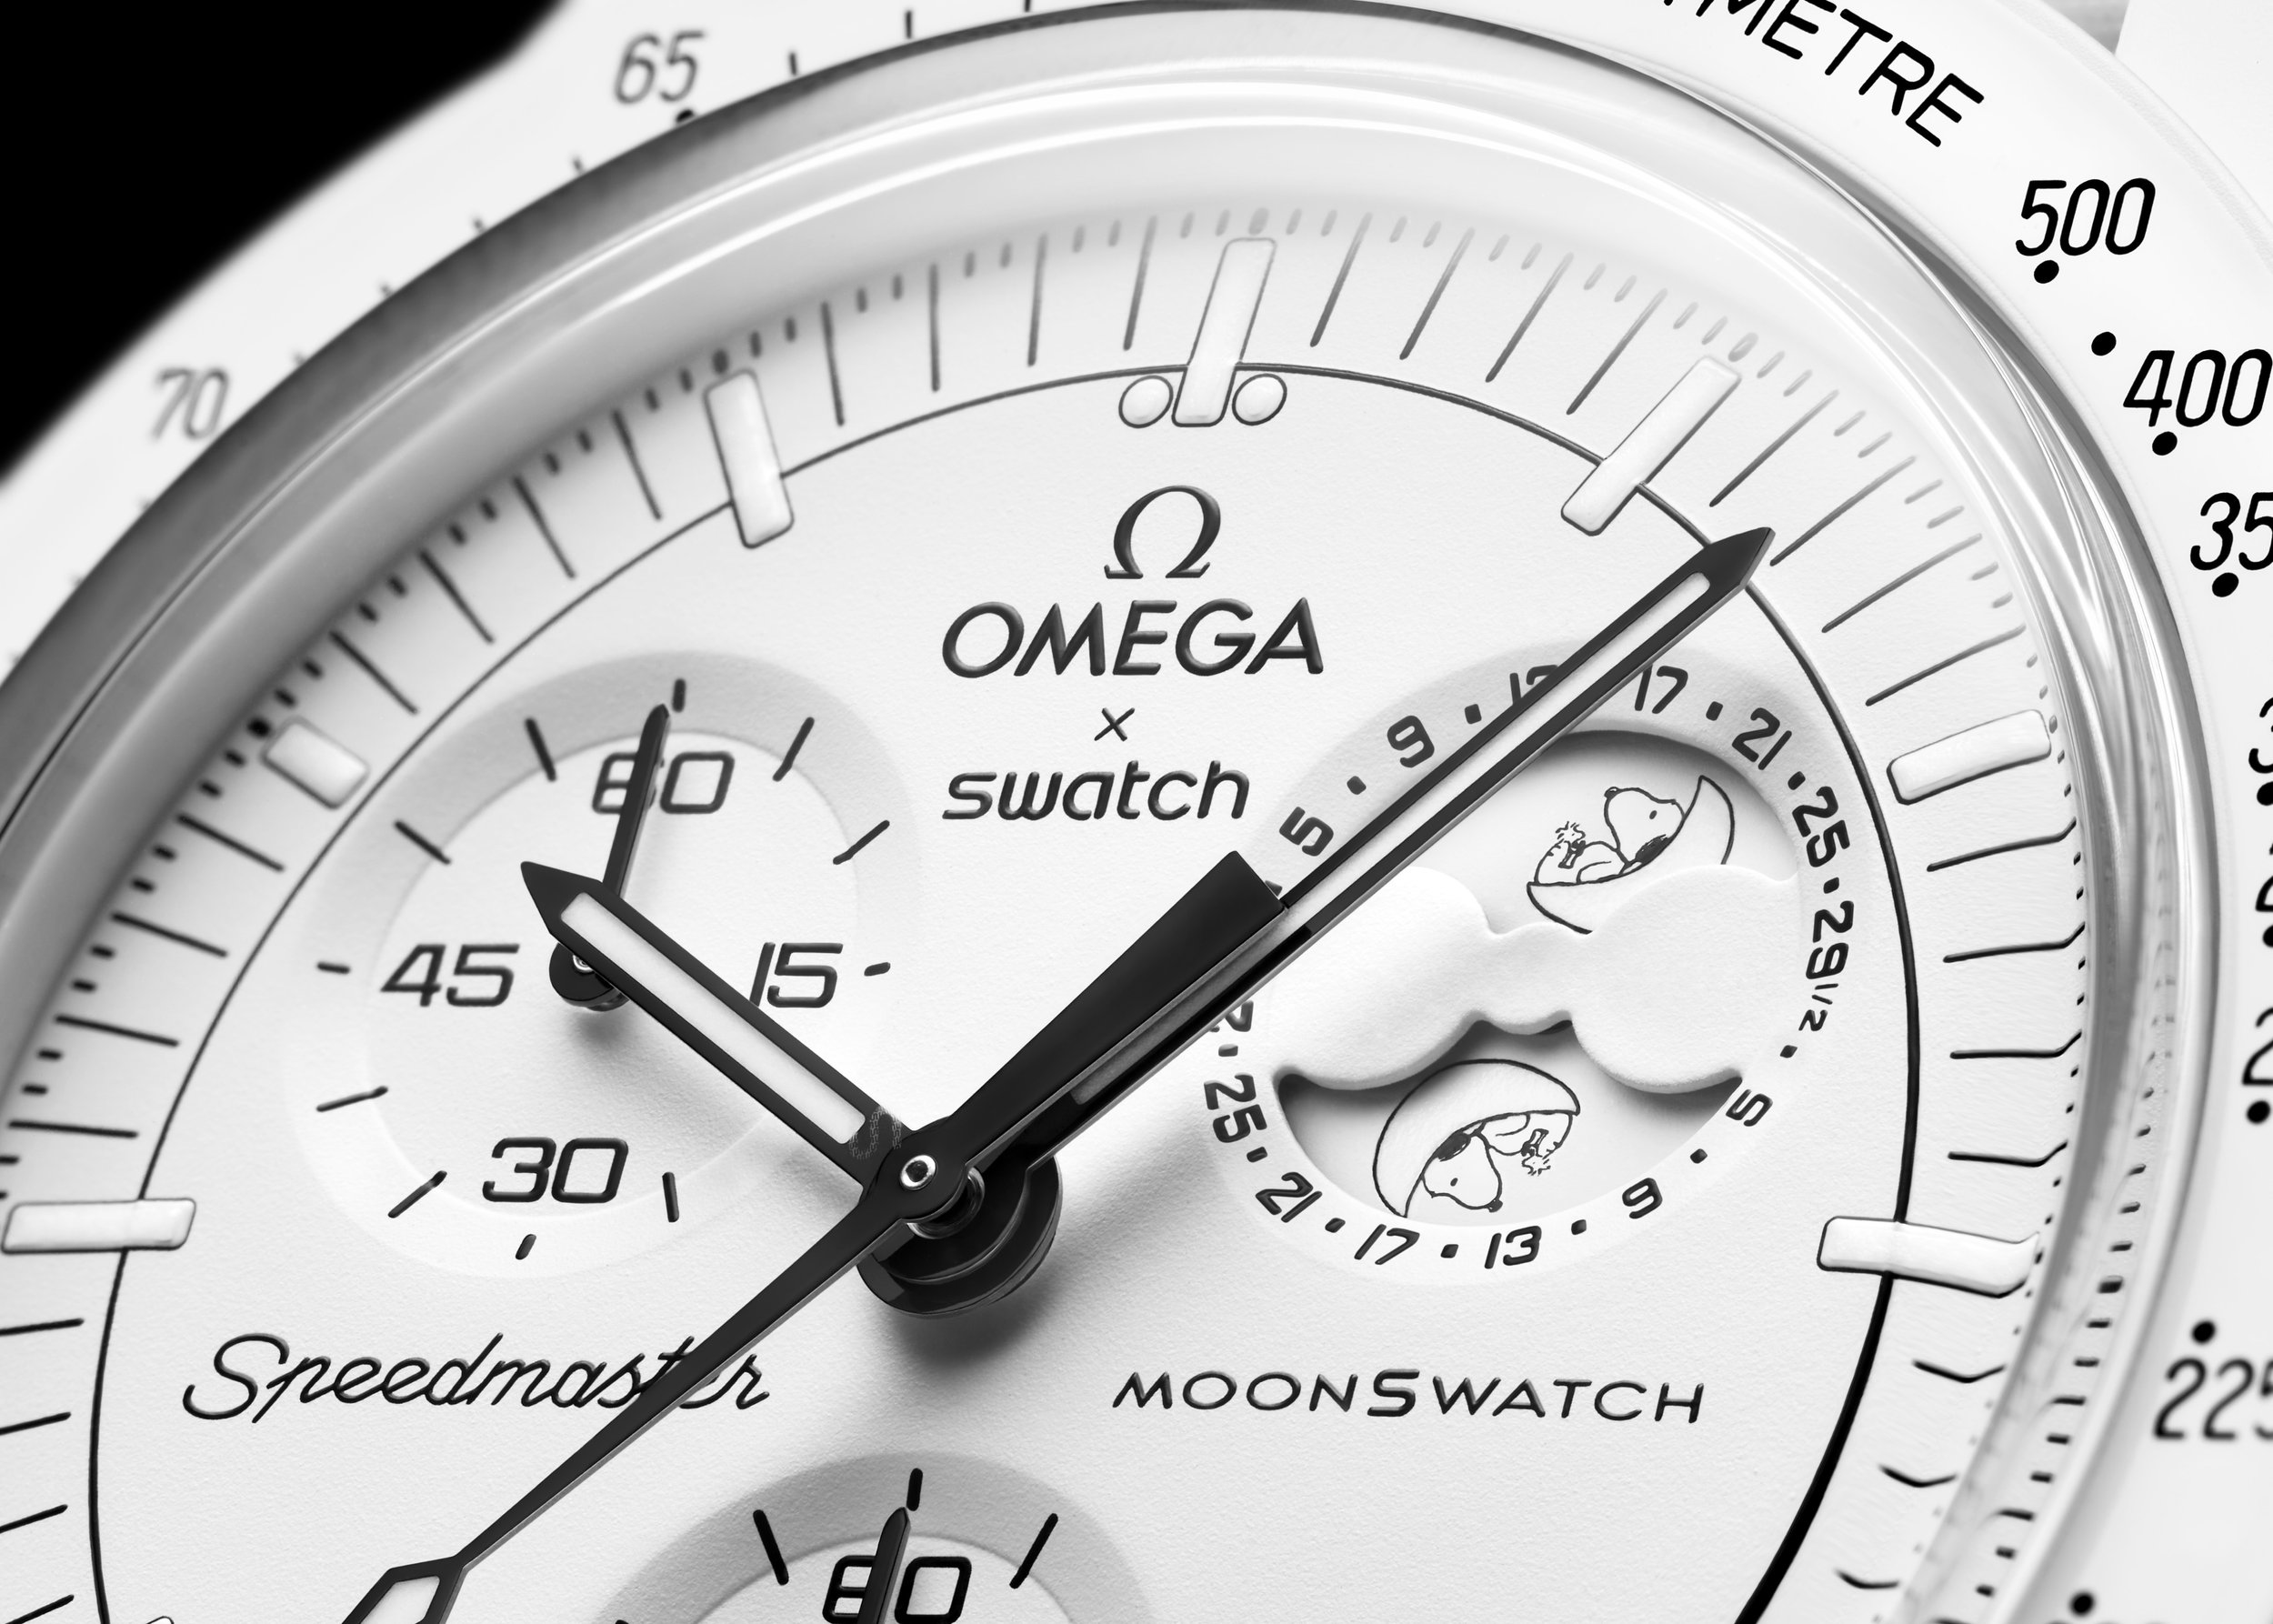 sc01_24_BioceramicMoonSwatch_MissionToTheMoonphase_close-up dial.jpg